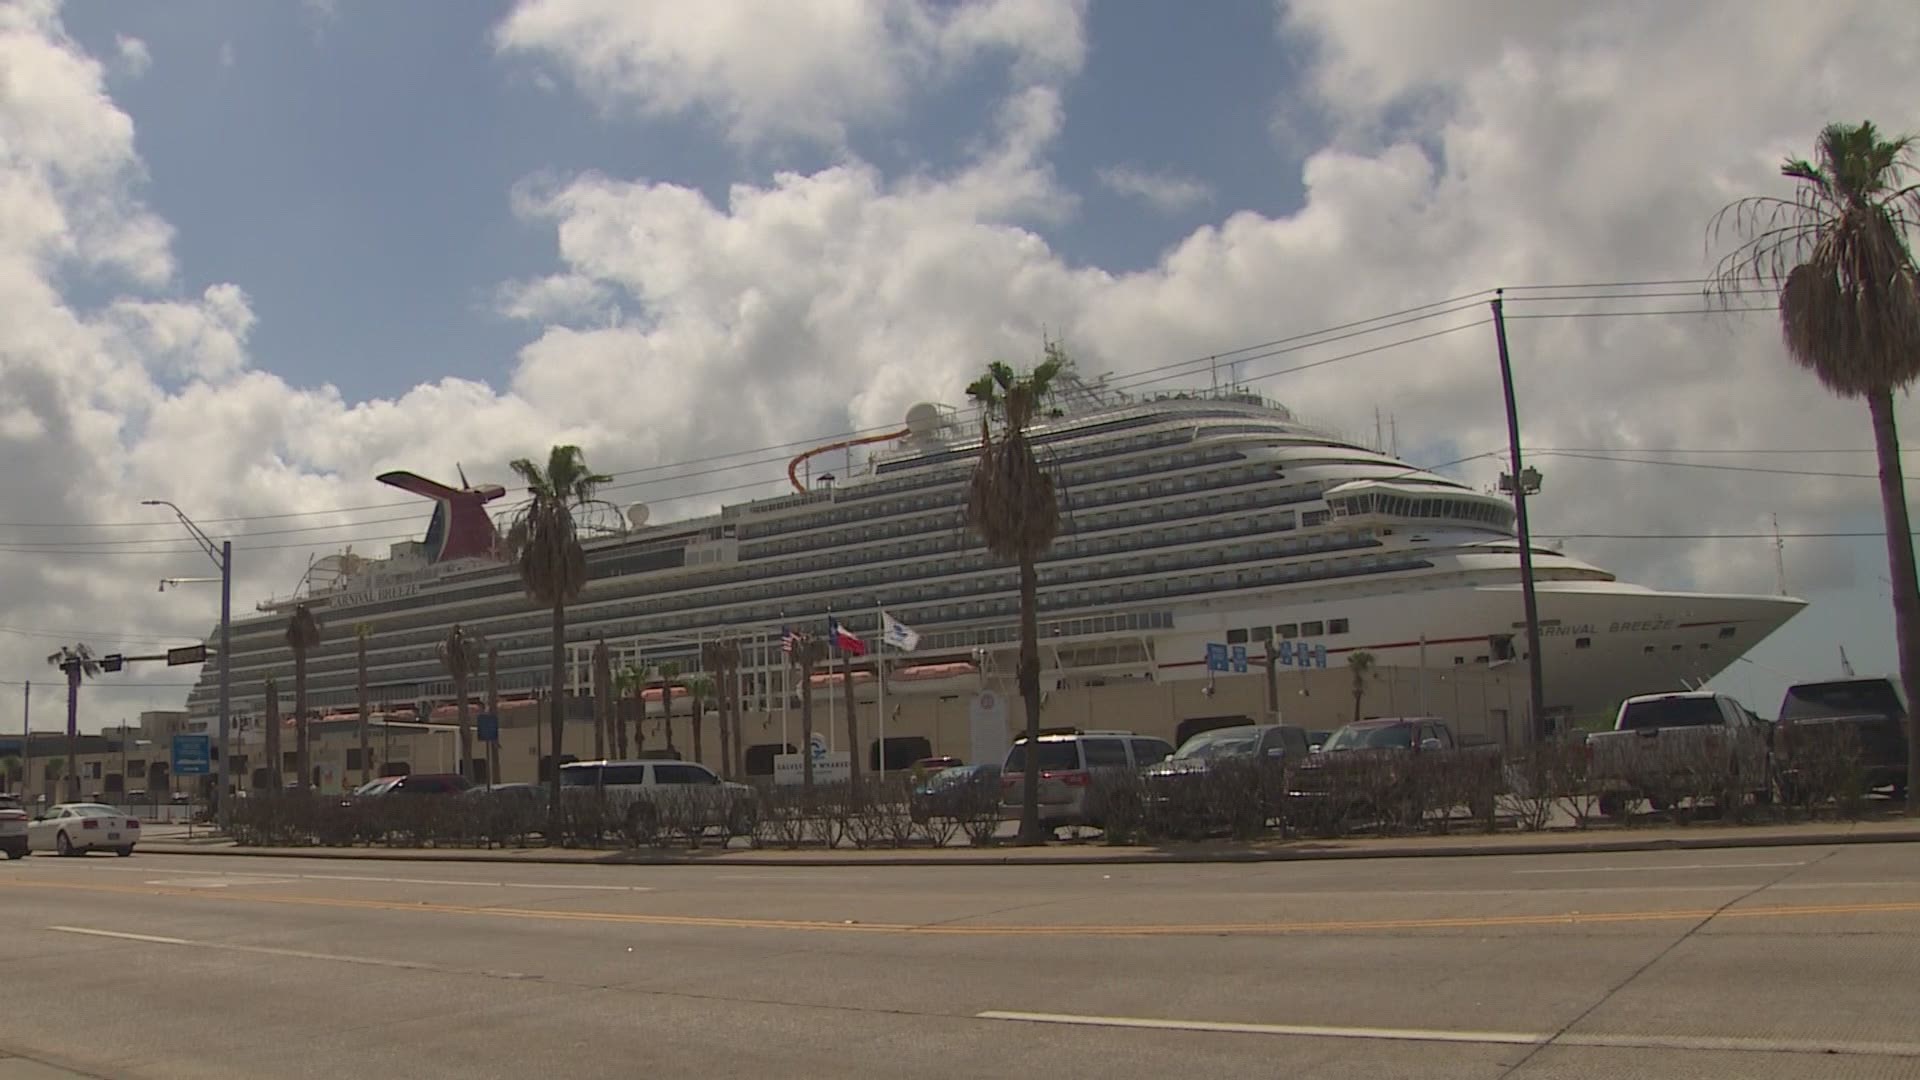 Carnival officials say the company will still require proof of COVID-19 vaccinations for most passengers sailing from Galveston when cruises restart in July.